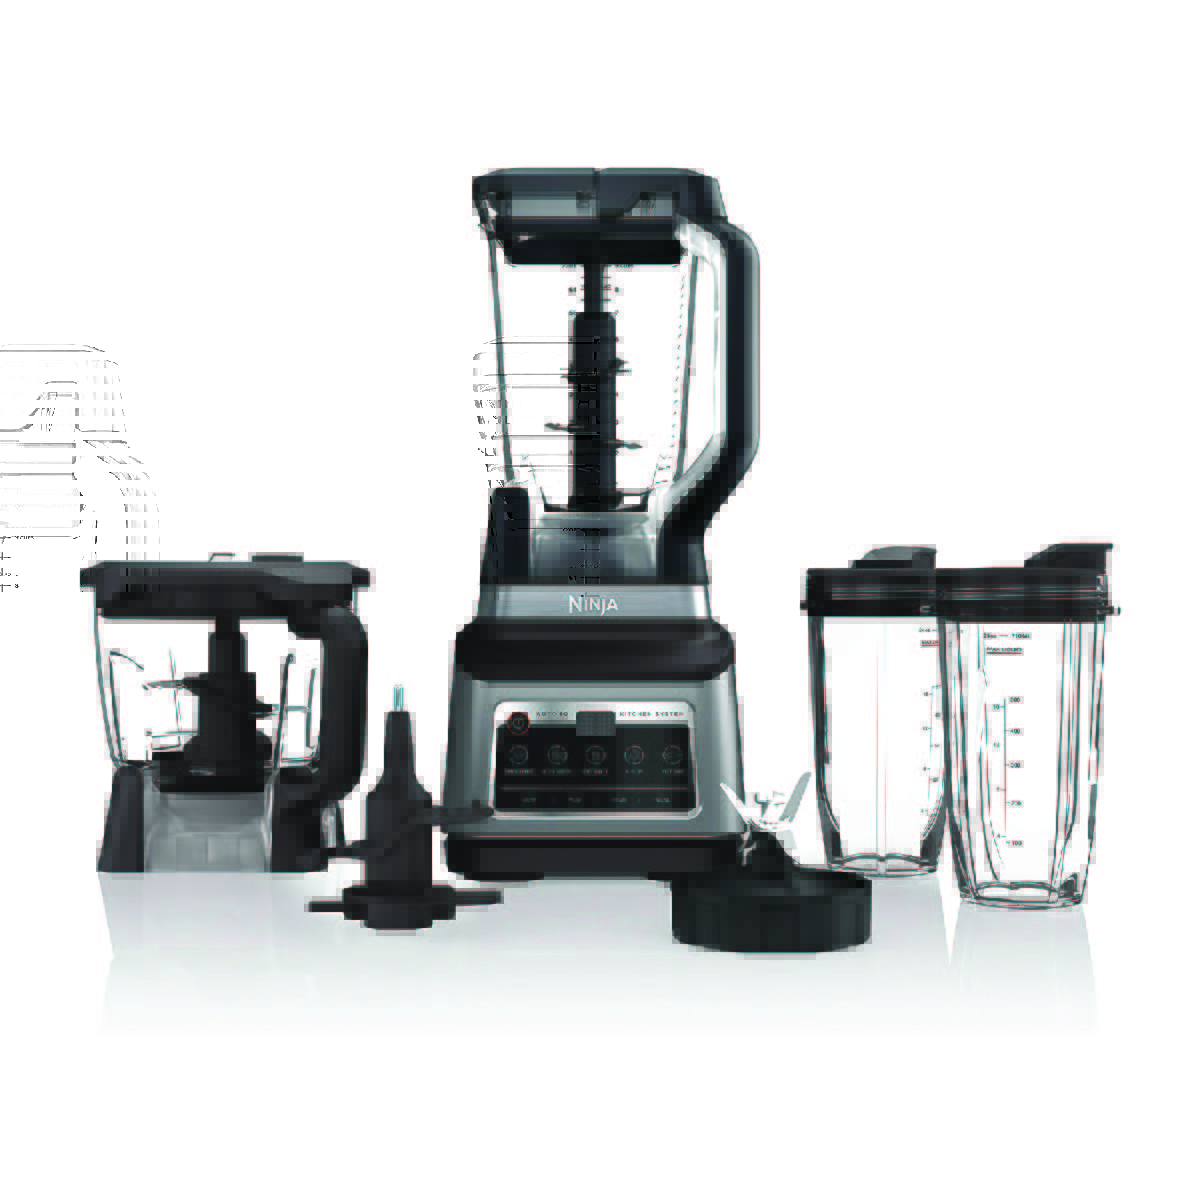 A Ninja brand blender with multiple attachments and pitchers.